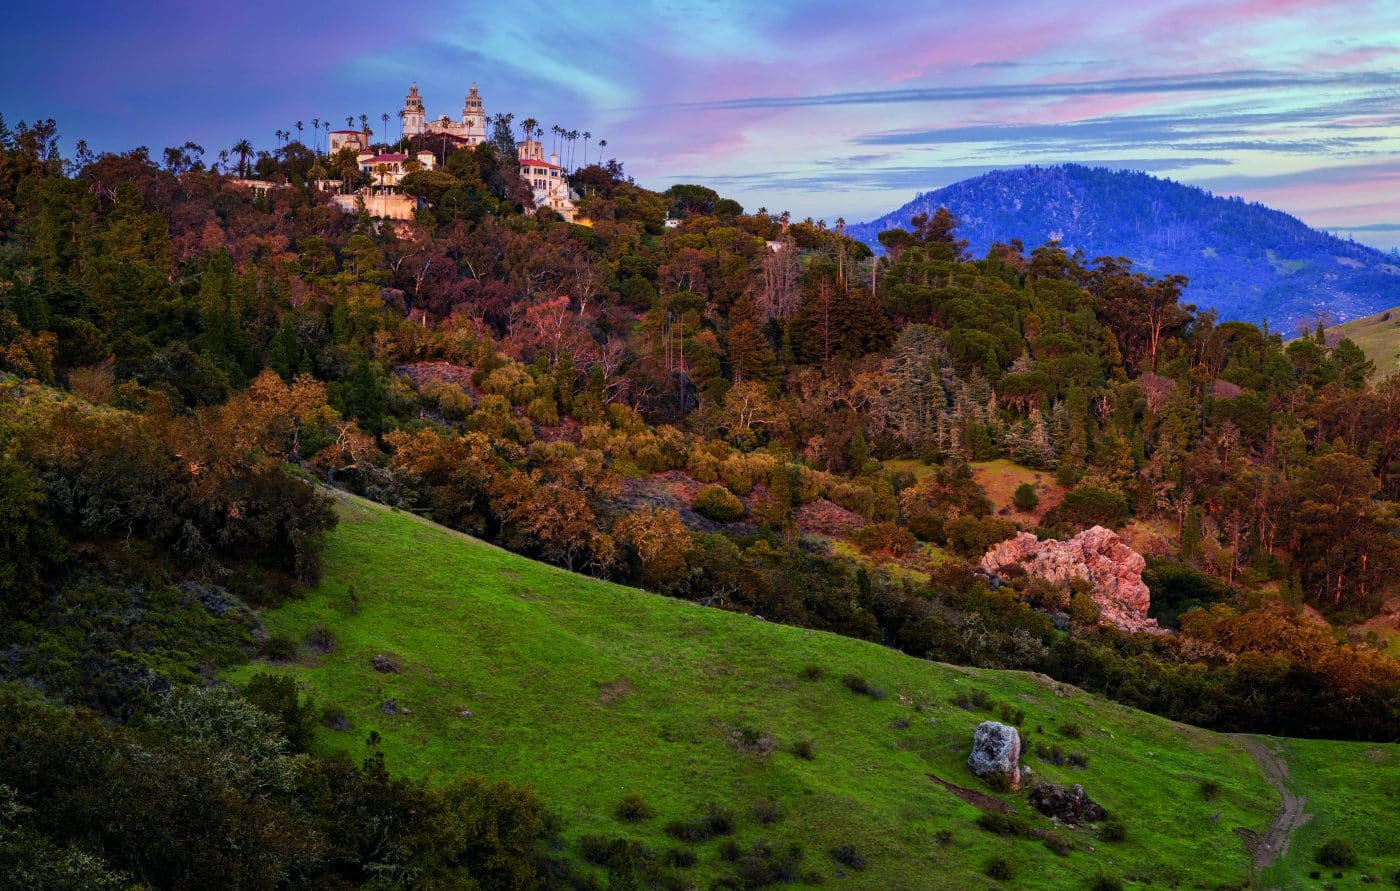 A view of Hearst Castle atop a hill